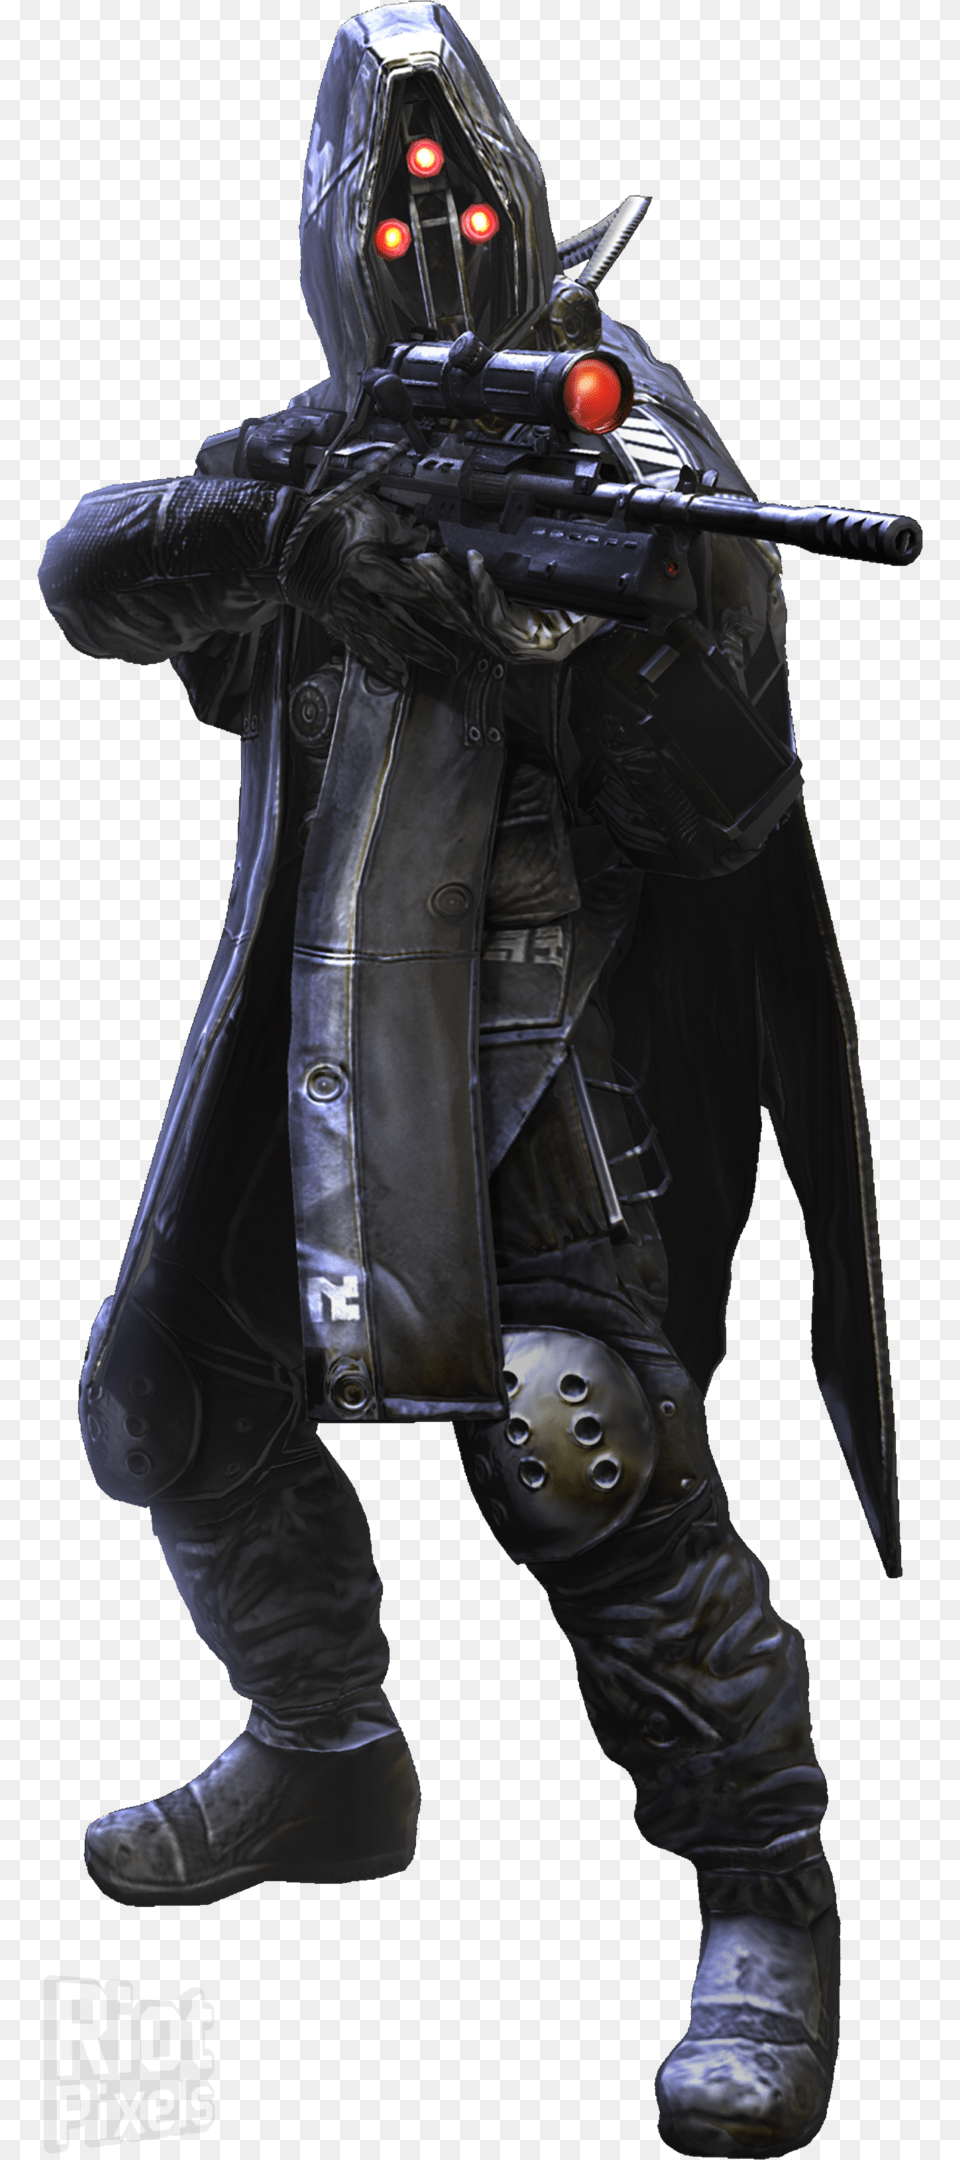 Fire Emblem Awakening Gerome, Adult, Male, Man, Person Png Image